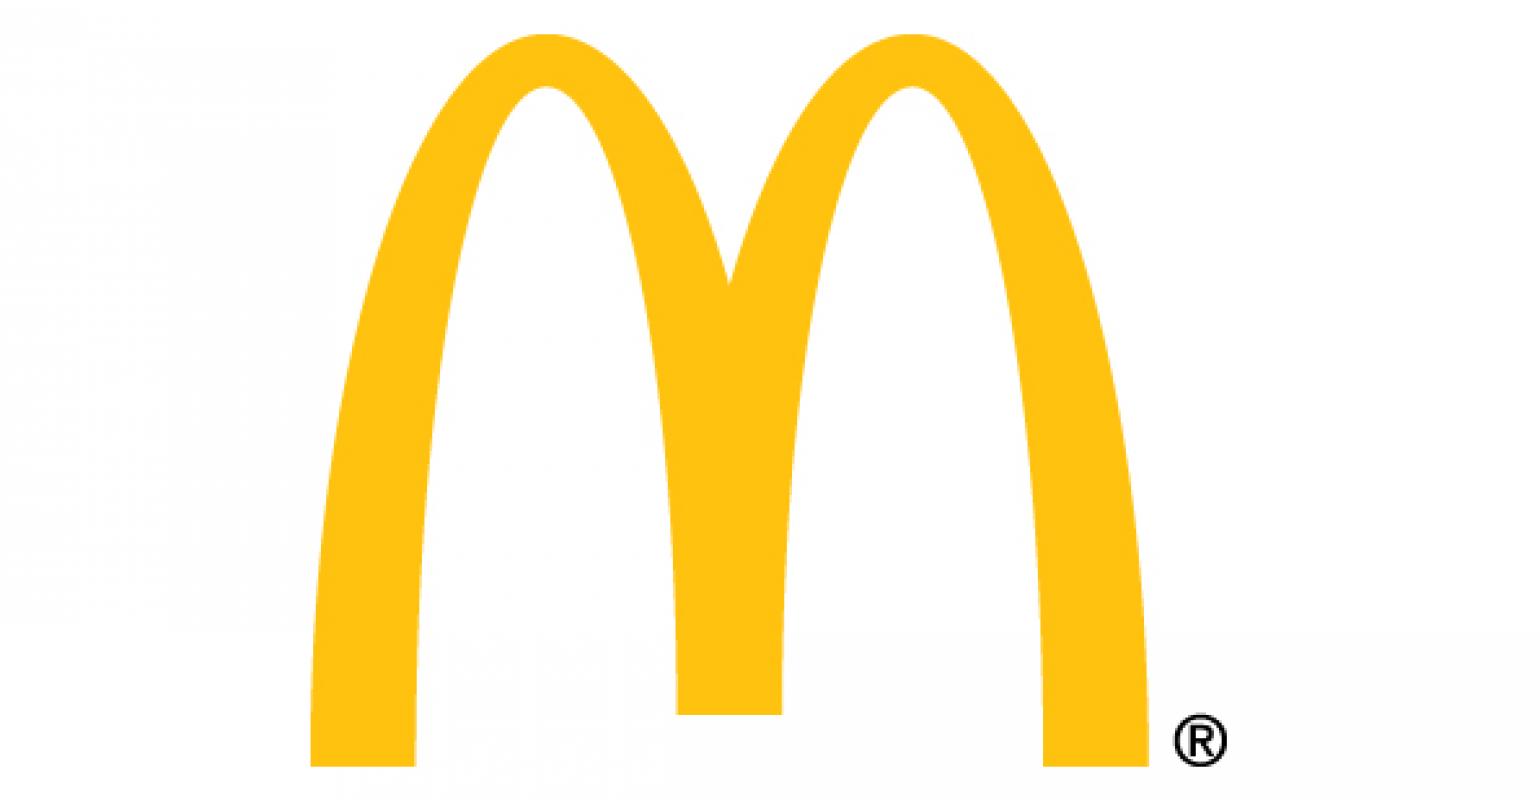 What does McDonalds have trademarked?